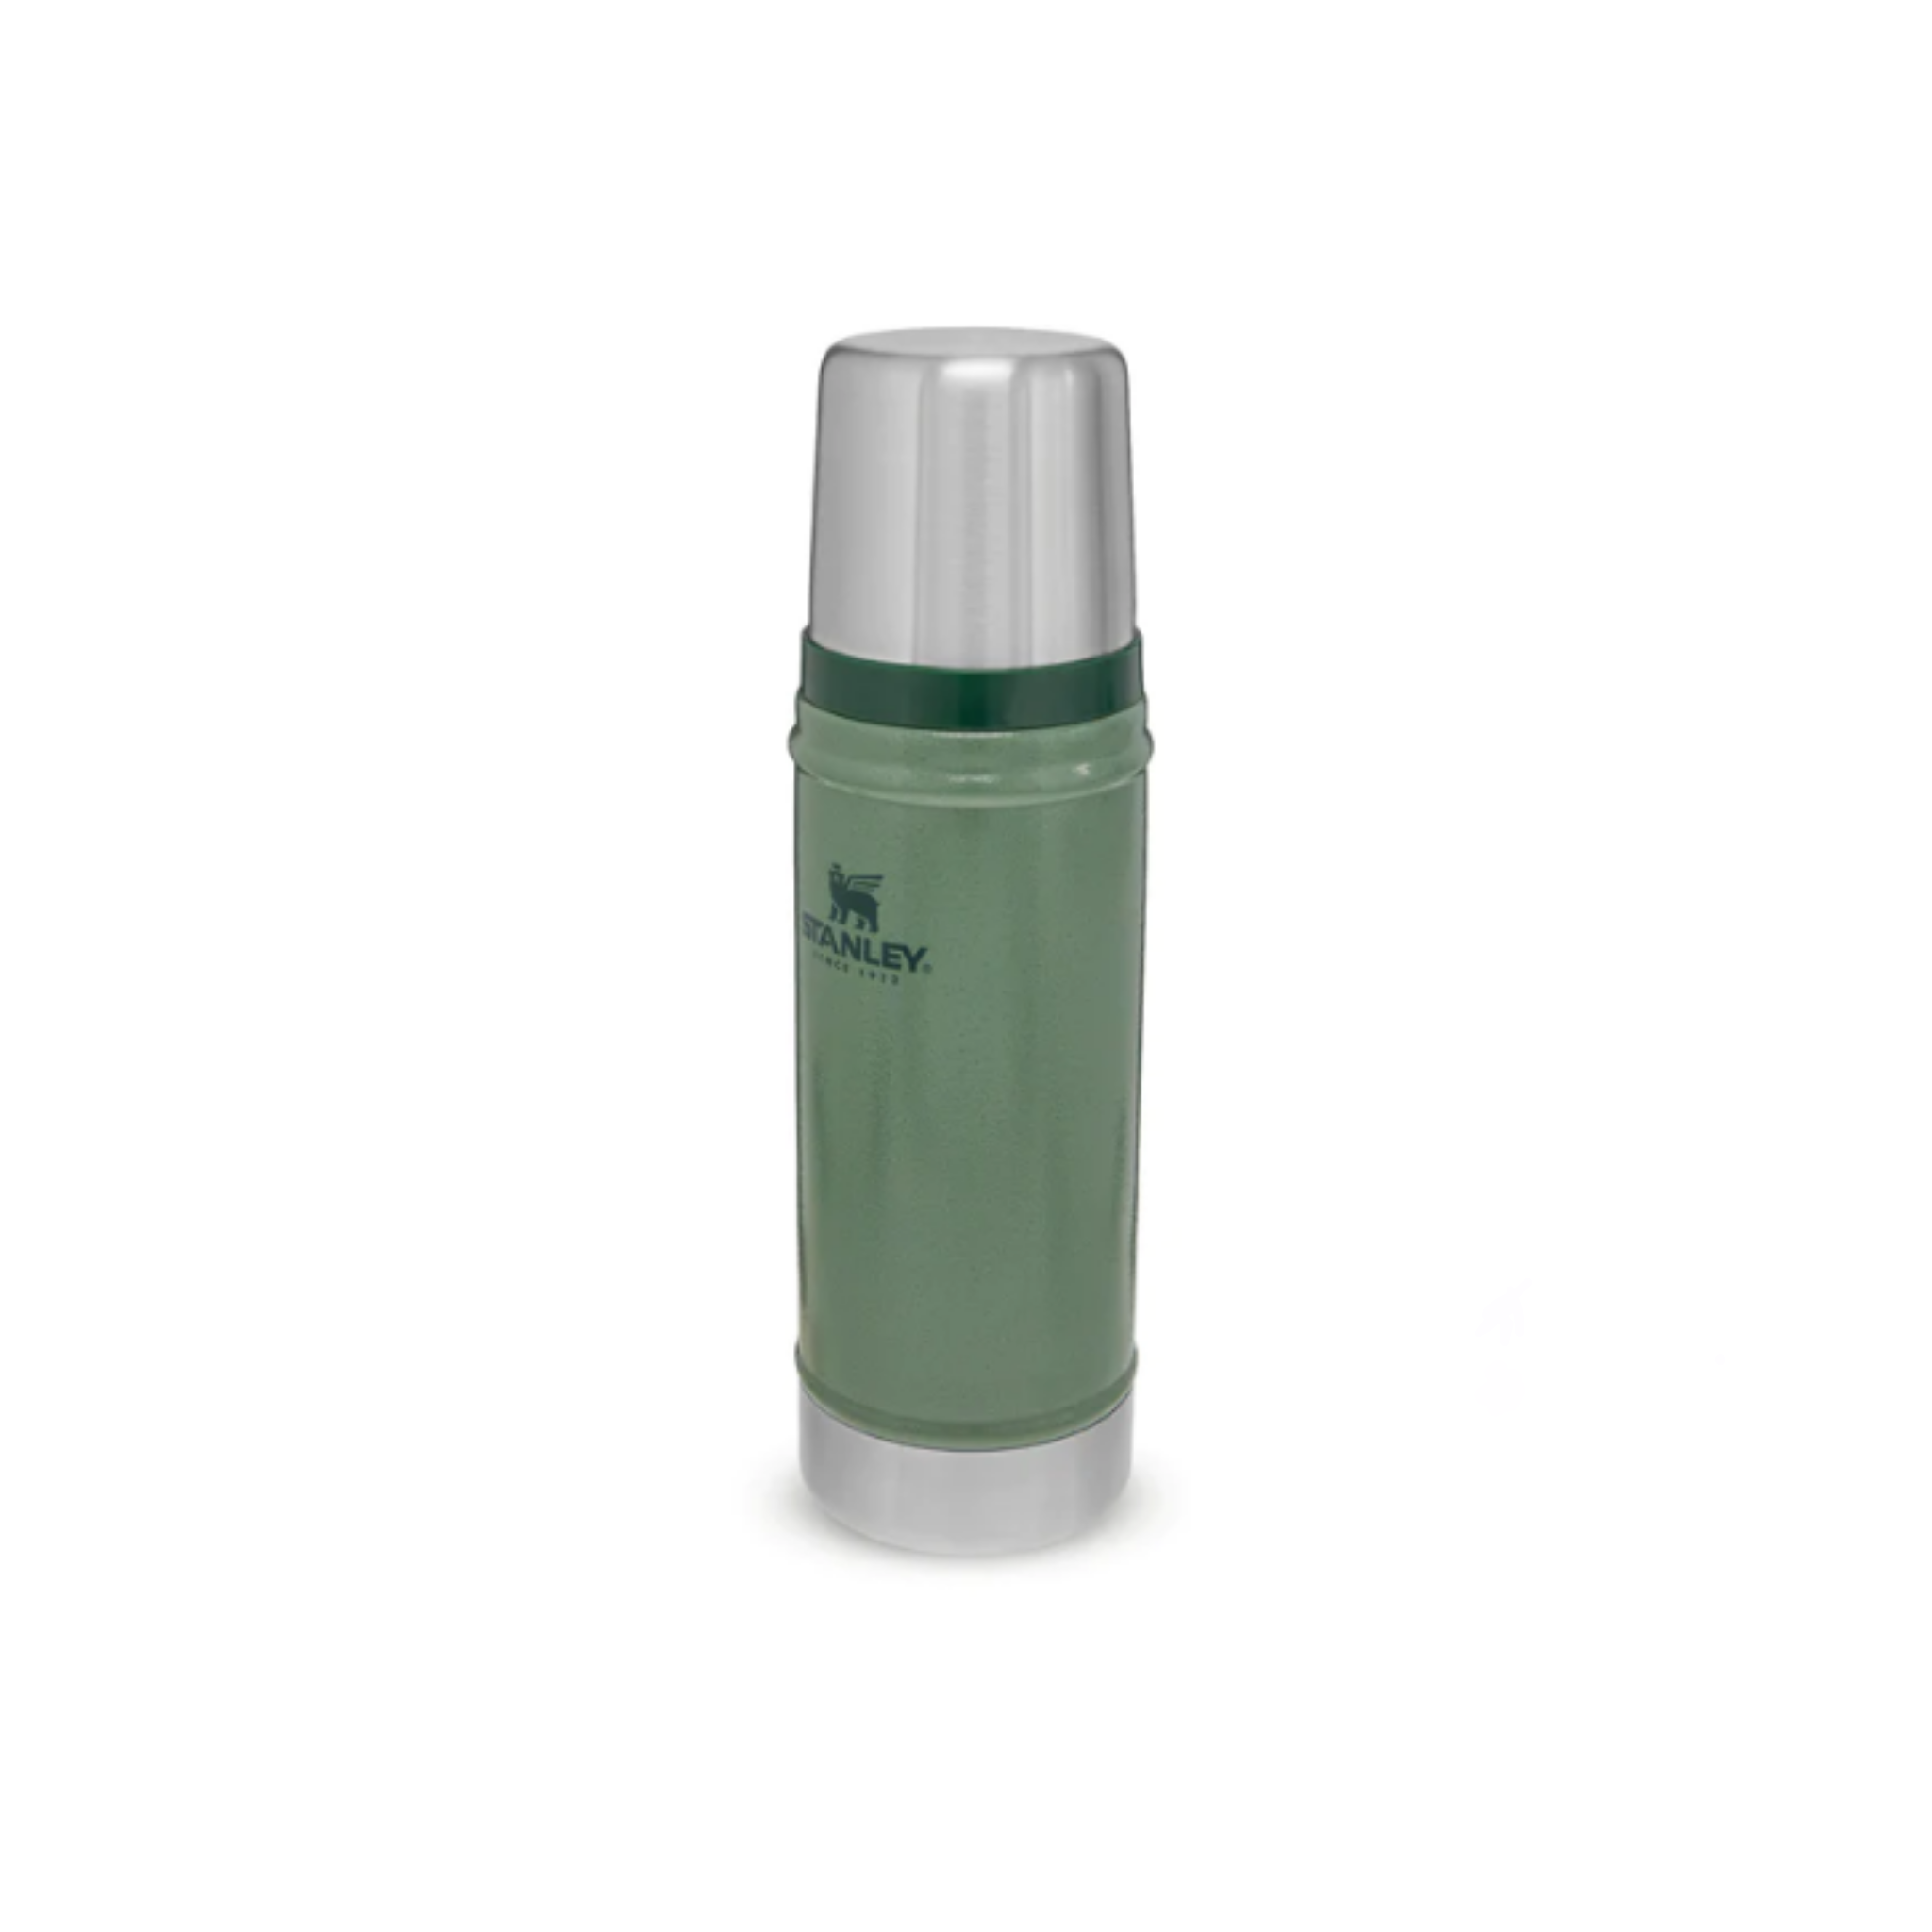 NEW STANLEY /ALADDIN CAMOUFLAGE THERMOS BOTTLE 1 QT.